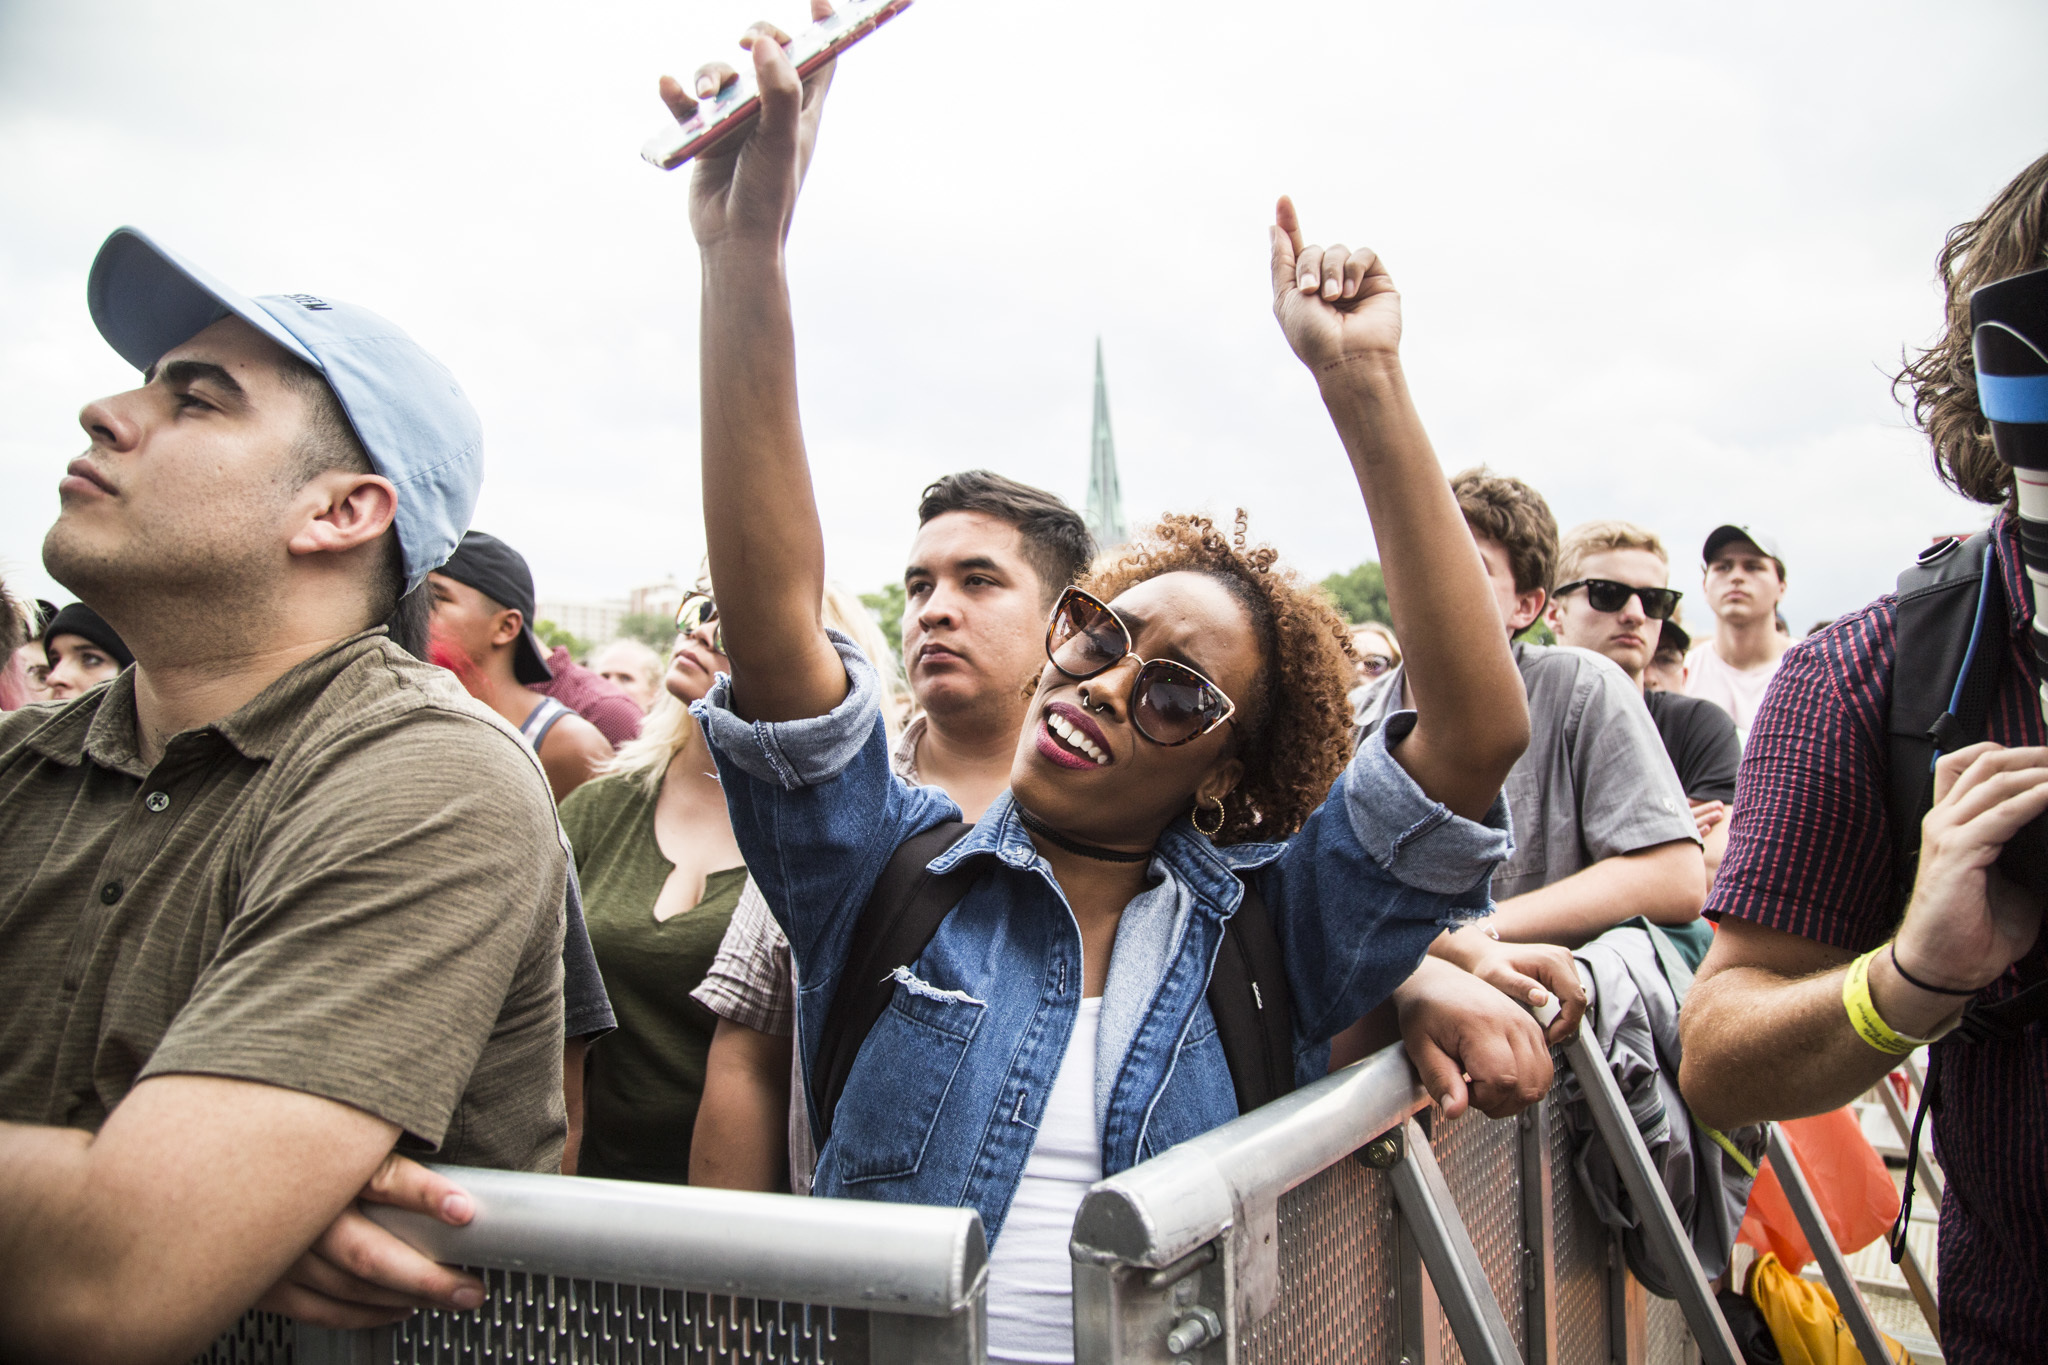 Photos from Pitchfork Music Festival 2018, Friday